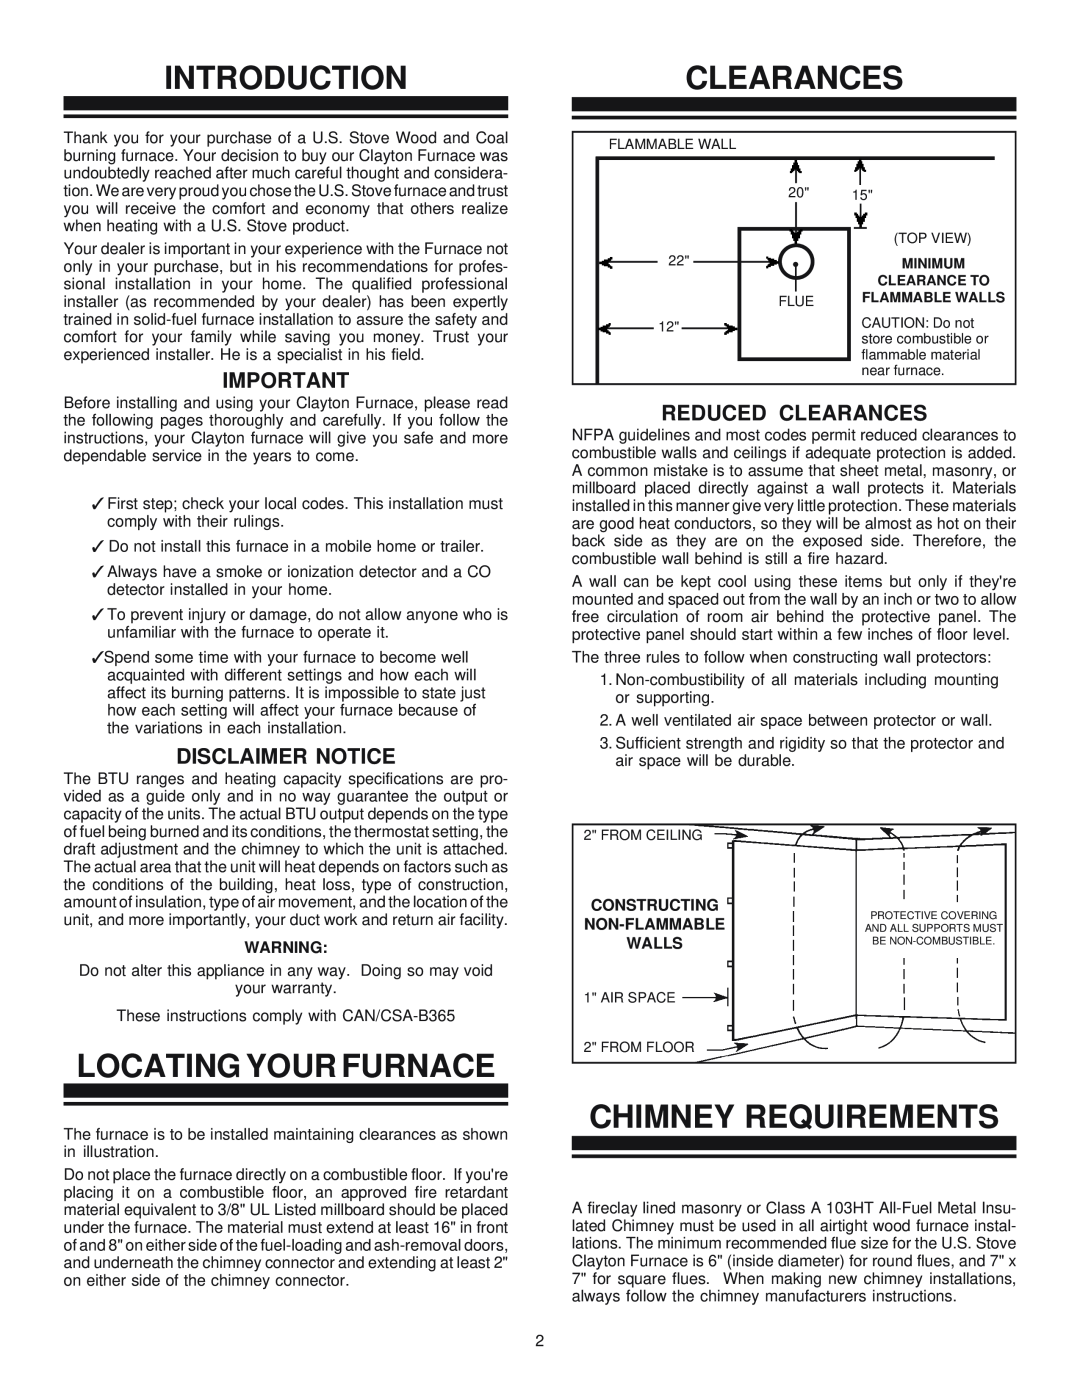 United States Stove 1600M manual Introduction, Locating Your Furnace, Clearances, Chimney Requirements, Disclaimer Notice 